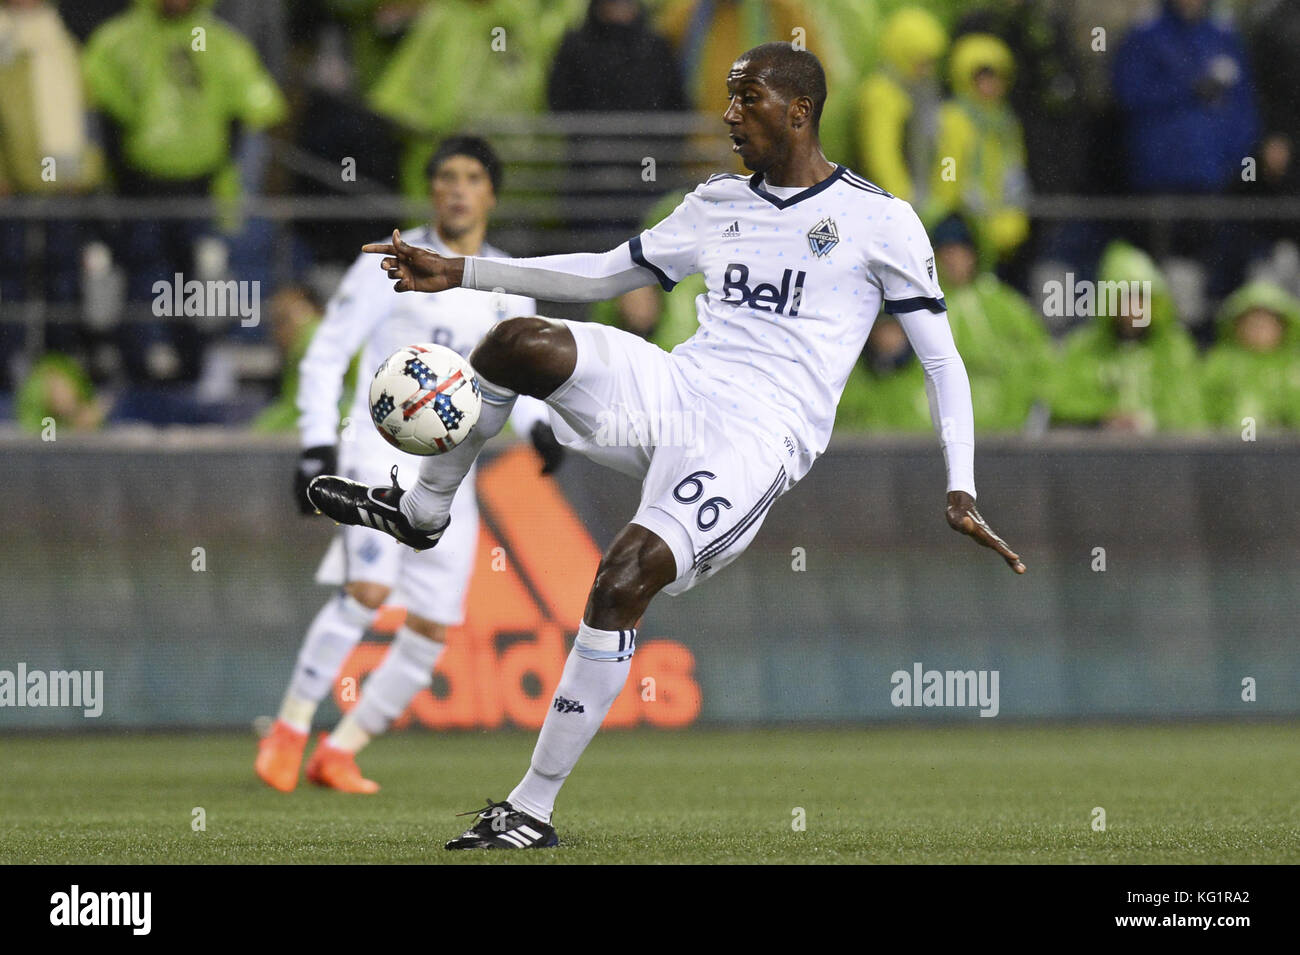 Close up of Vancouver Whitecaps FC jersey 2021 Stock Photo - Alamy